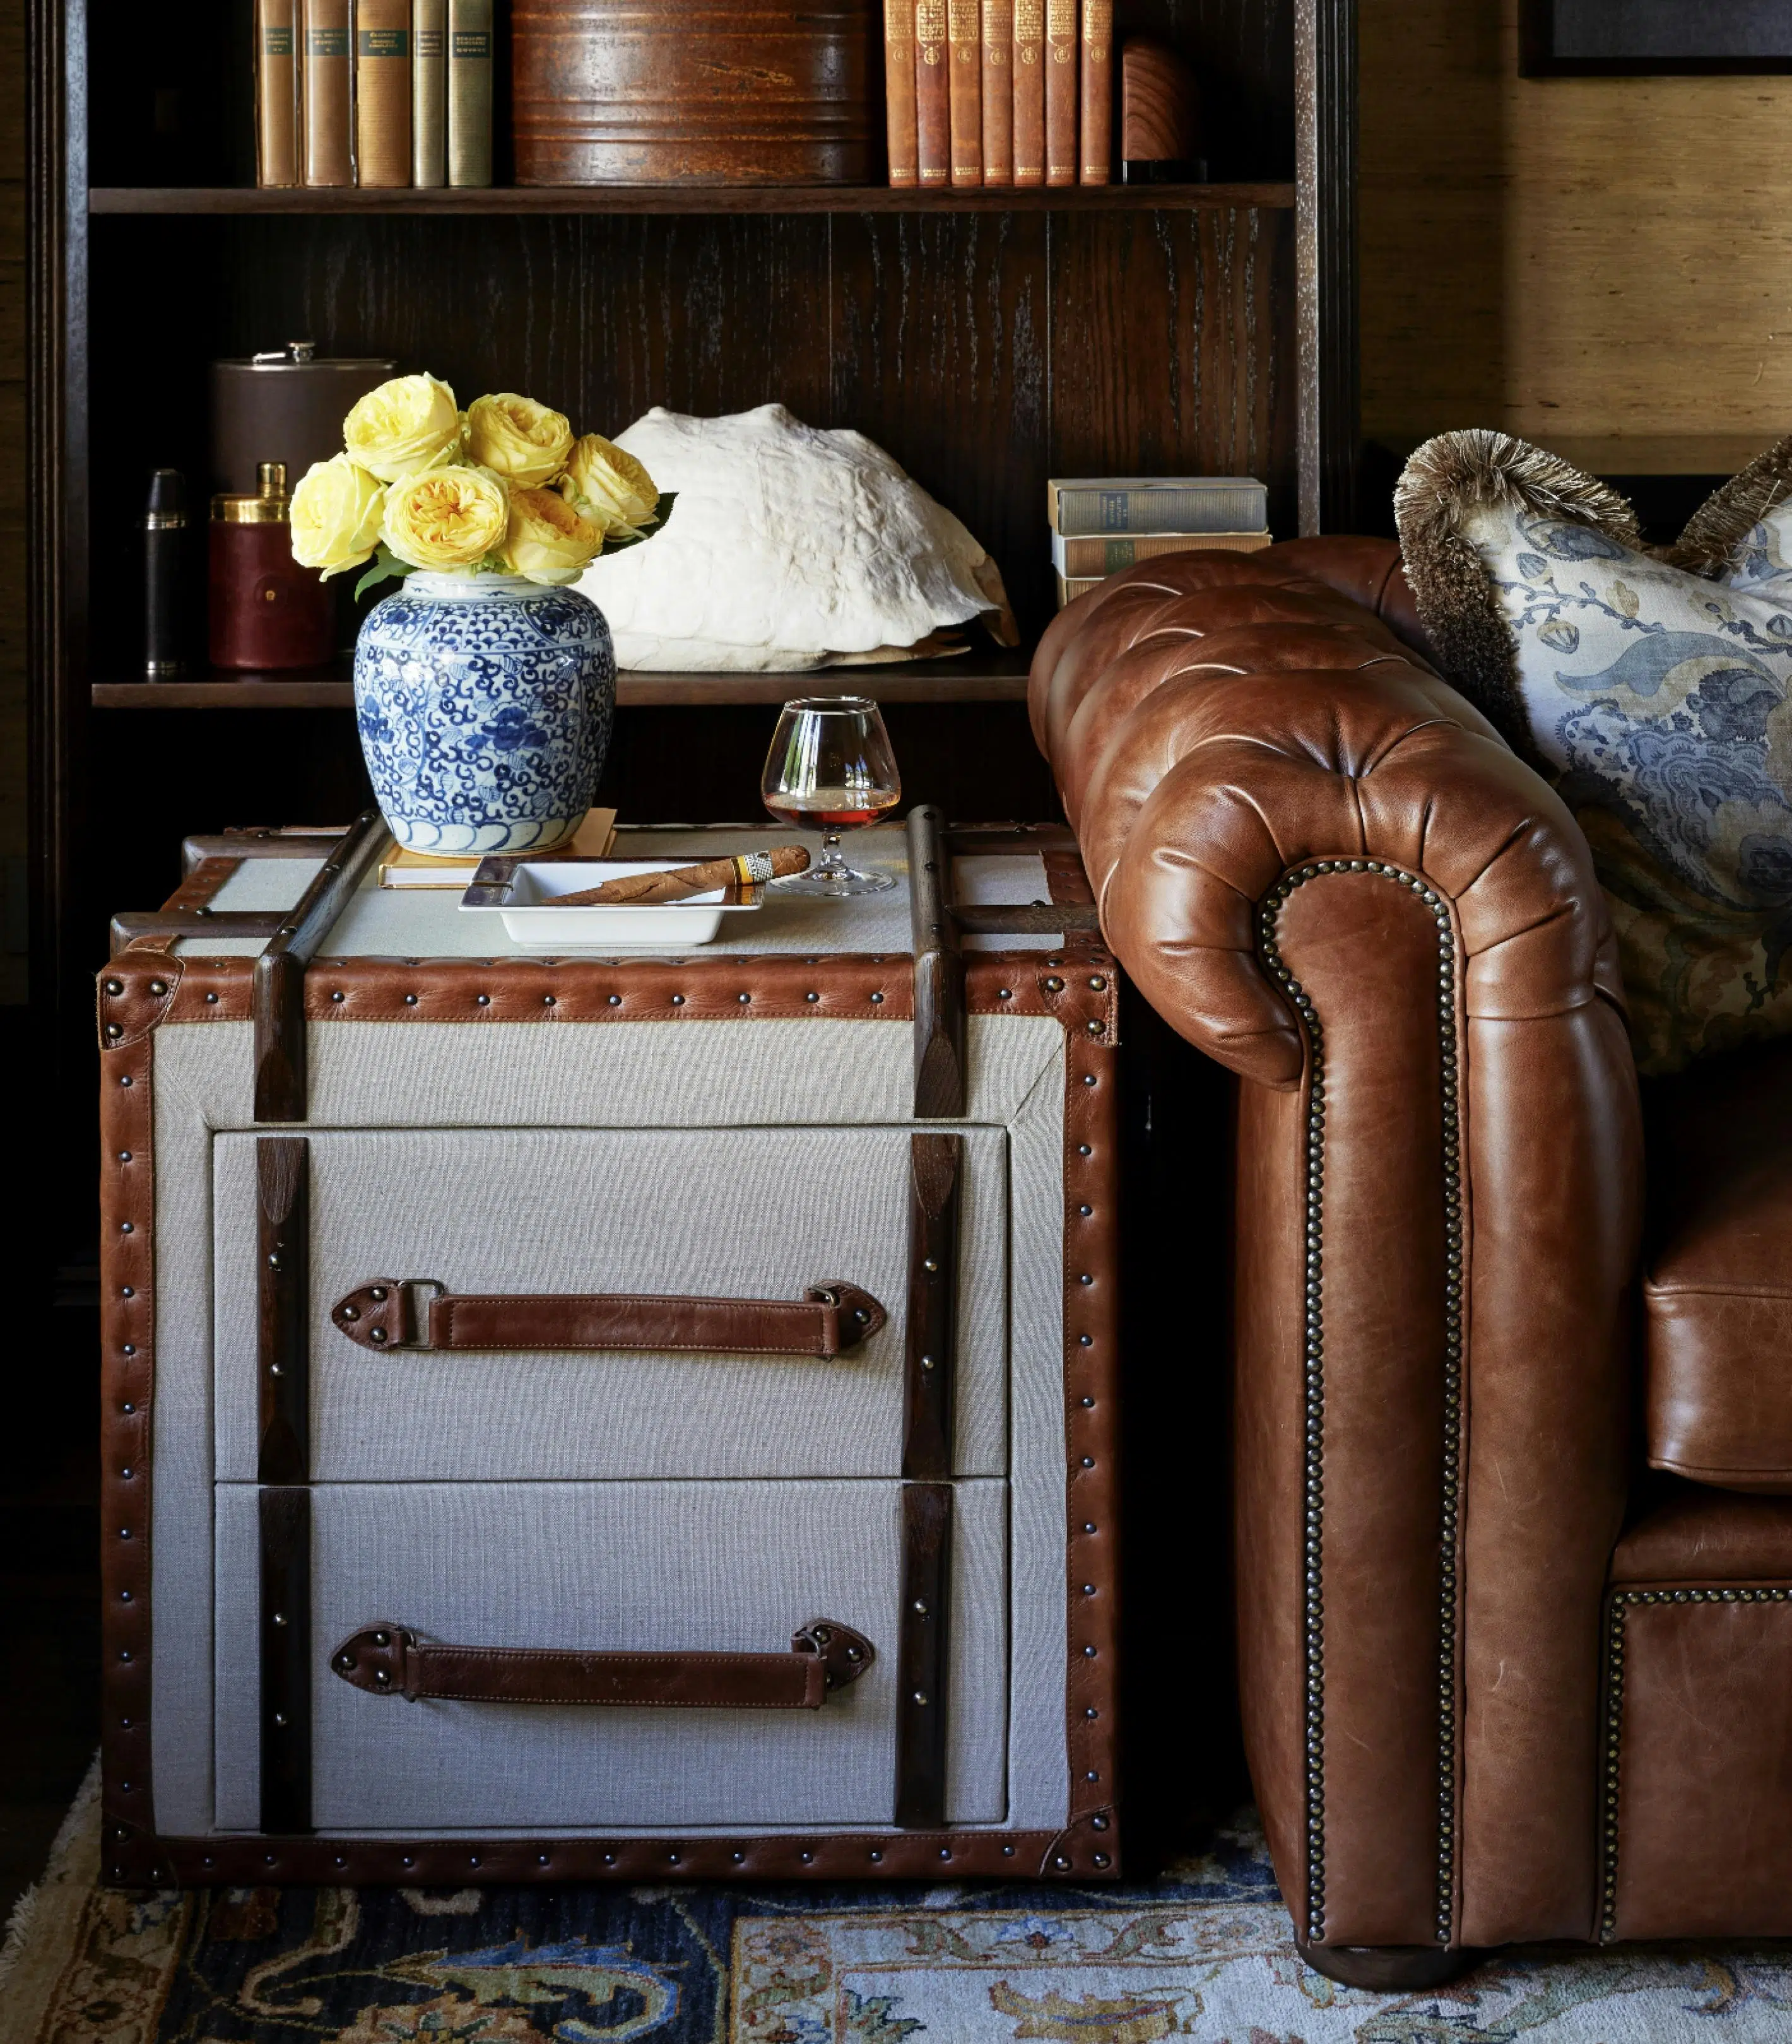 A side table with two drawers is upholstered in leather and a pale, textured fabric. Beside it is a brown leather couch. On its surface are a glass snifter of whisky or another dark liquid, an ashtray holding a cigar and a blue-and-white vase of yellow flowers. Behind it, wooden bookshelves hold a very large white shell, some hip flasks, and vintage books